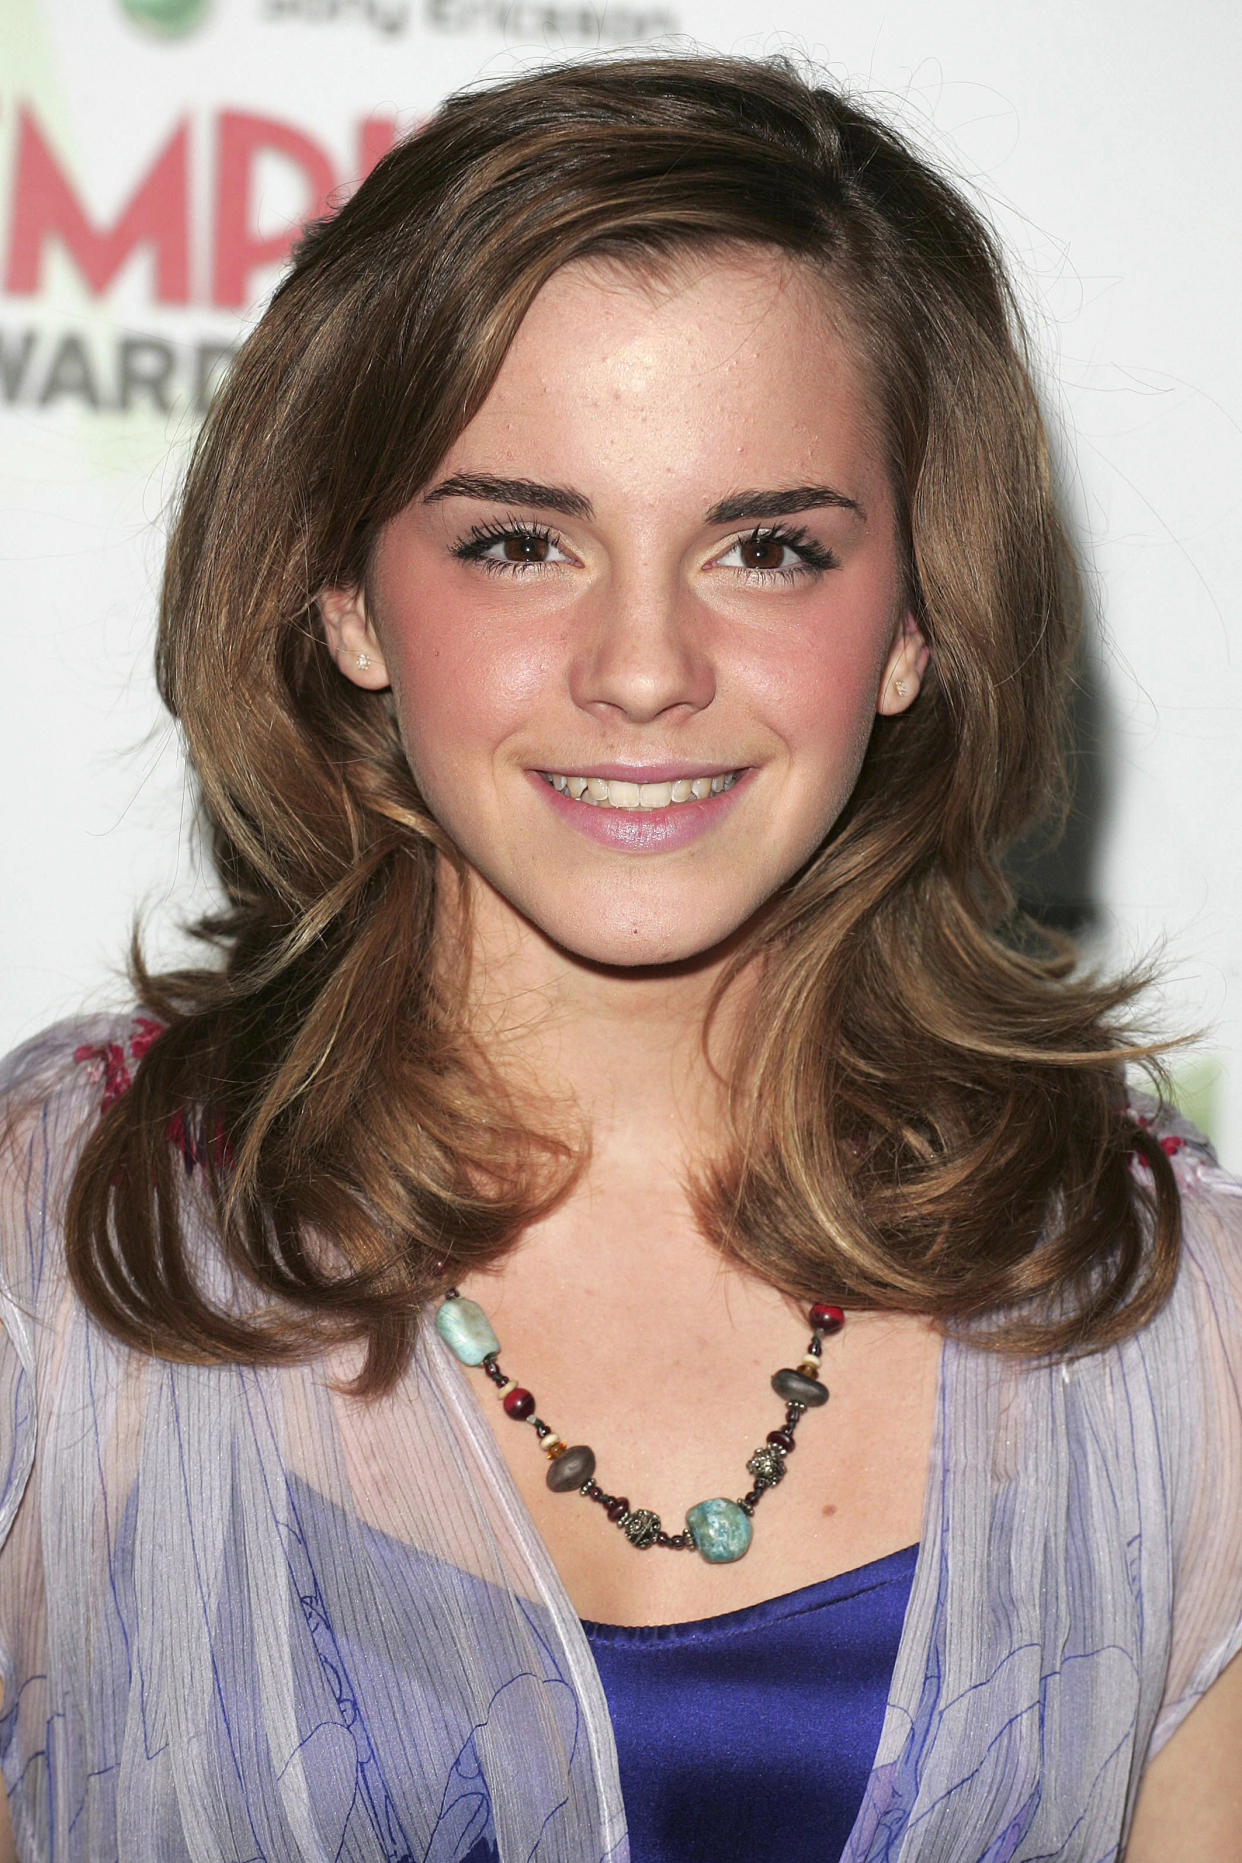 Emma Watson at the Sony Ericsson Empire Film Awards in 2006. (Getty Images)